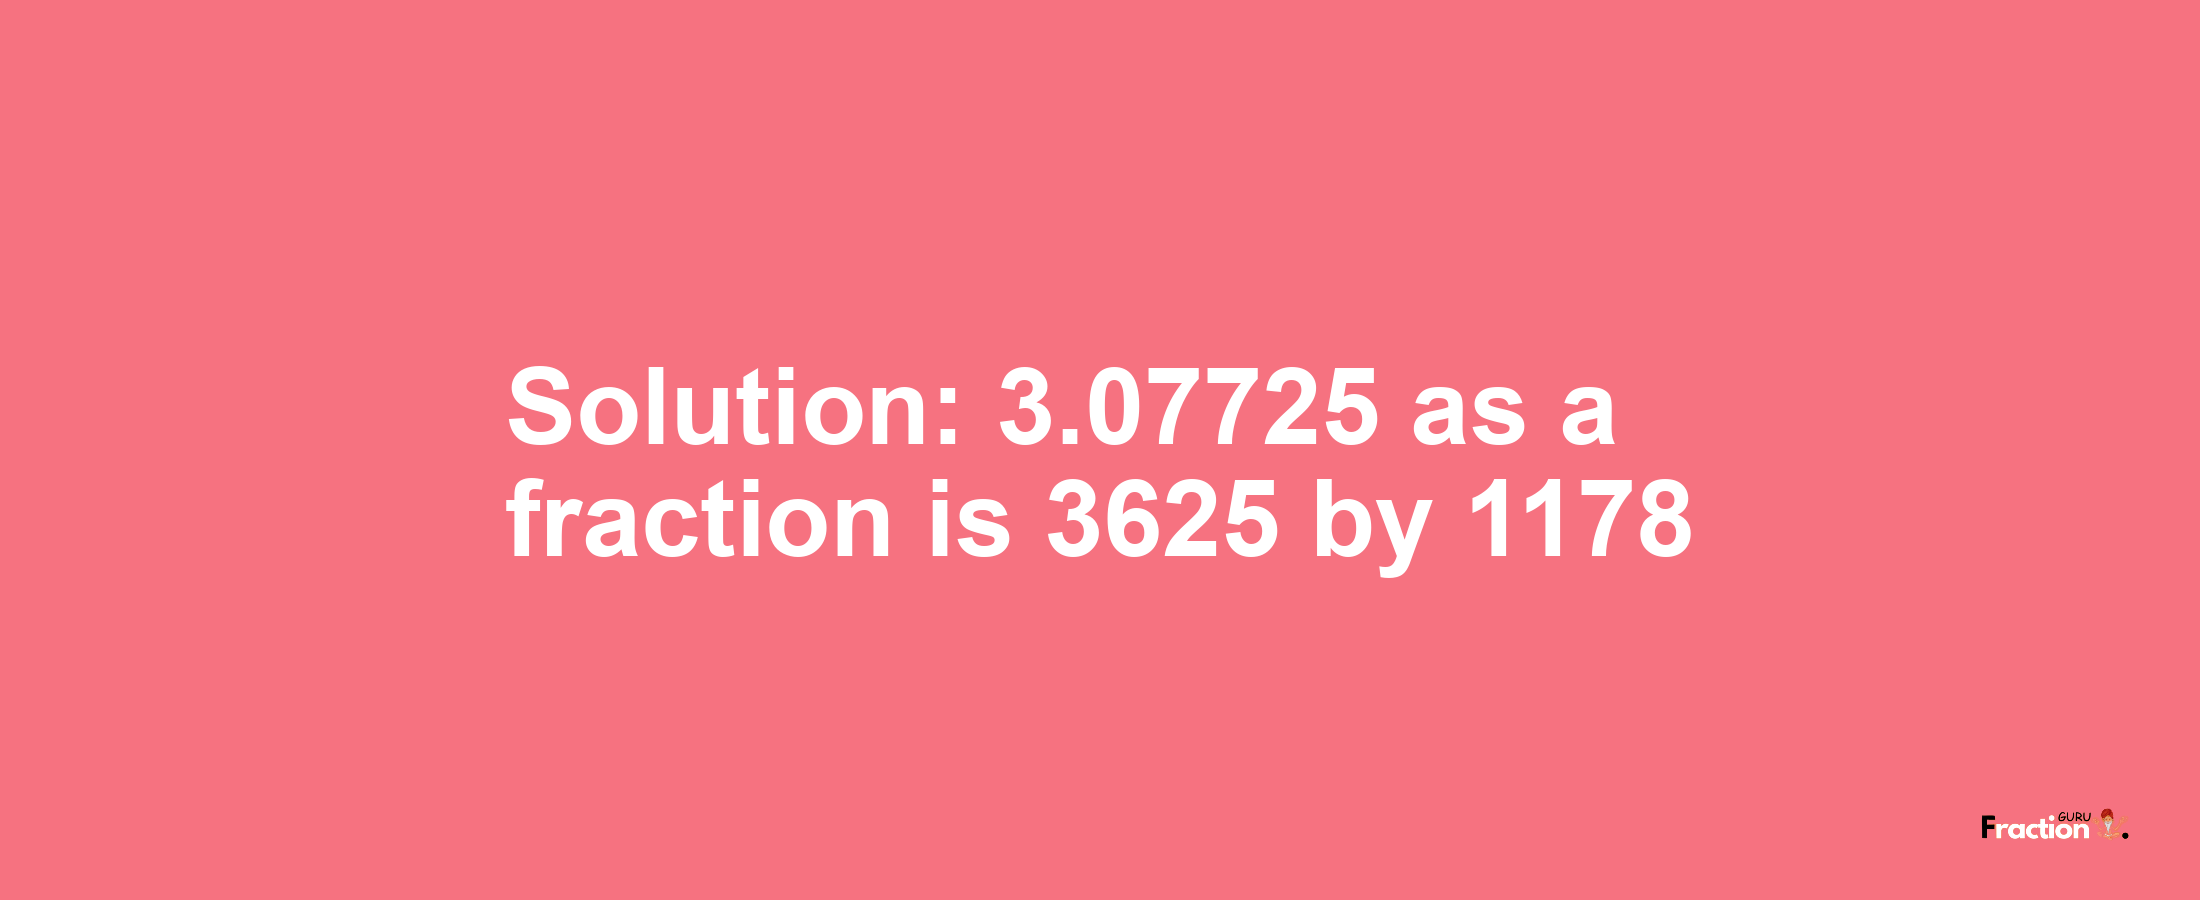 Solution:3.07725 as a fraction is 3625/1178